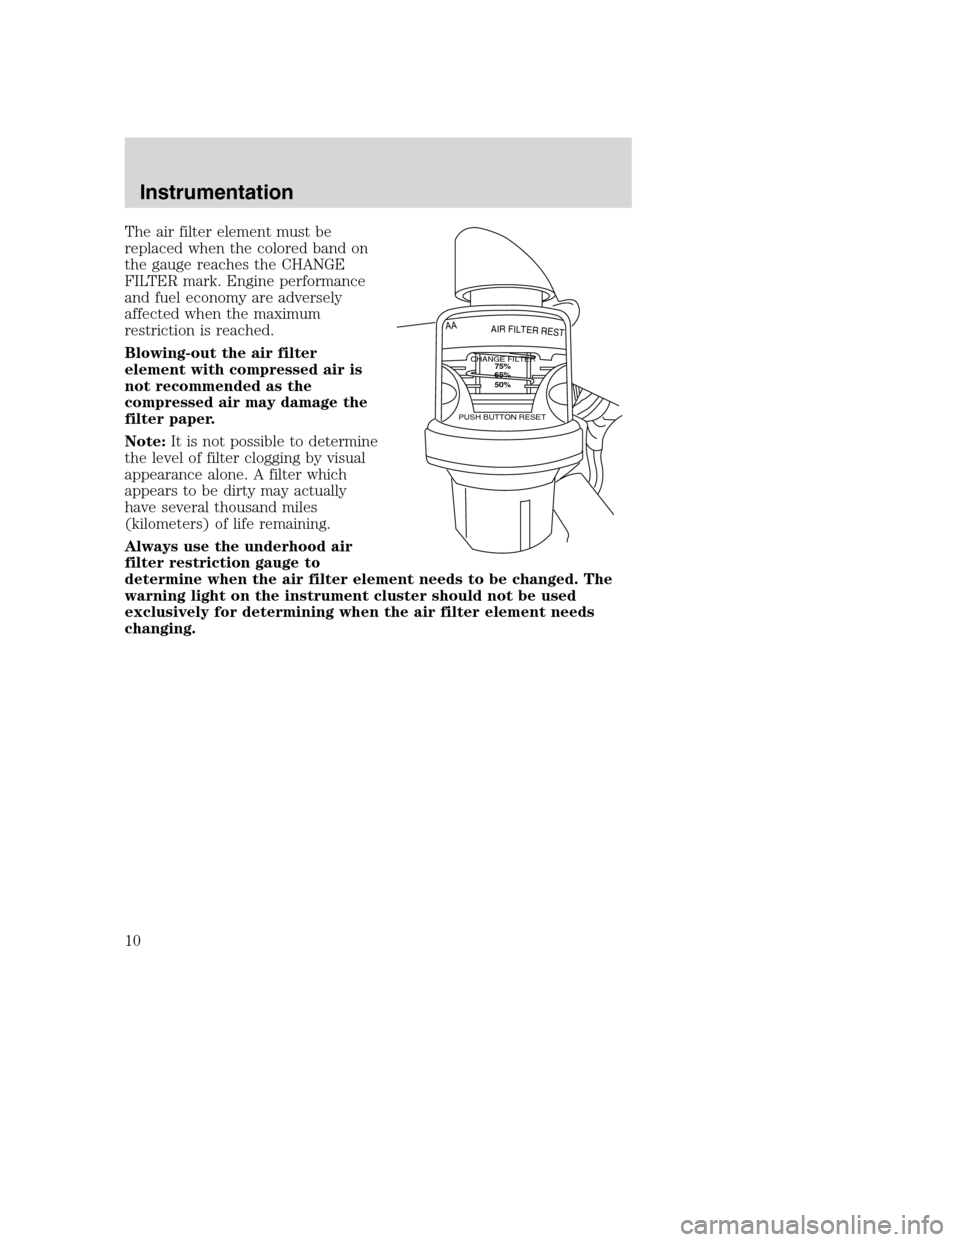 FORD SUPER DUTY 2005 1.G Diesel Supplement Manual The air filter element must be
replaced when the colored band on
the gauge reaches the CHANGE
FILTER mark. Engine performance
and fuel economy are adversely
affected when the maximum
restriction is re